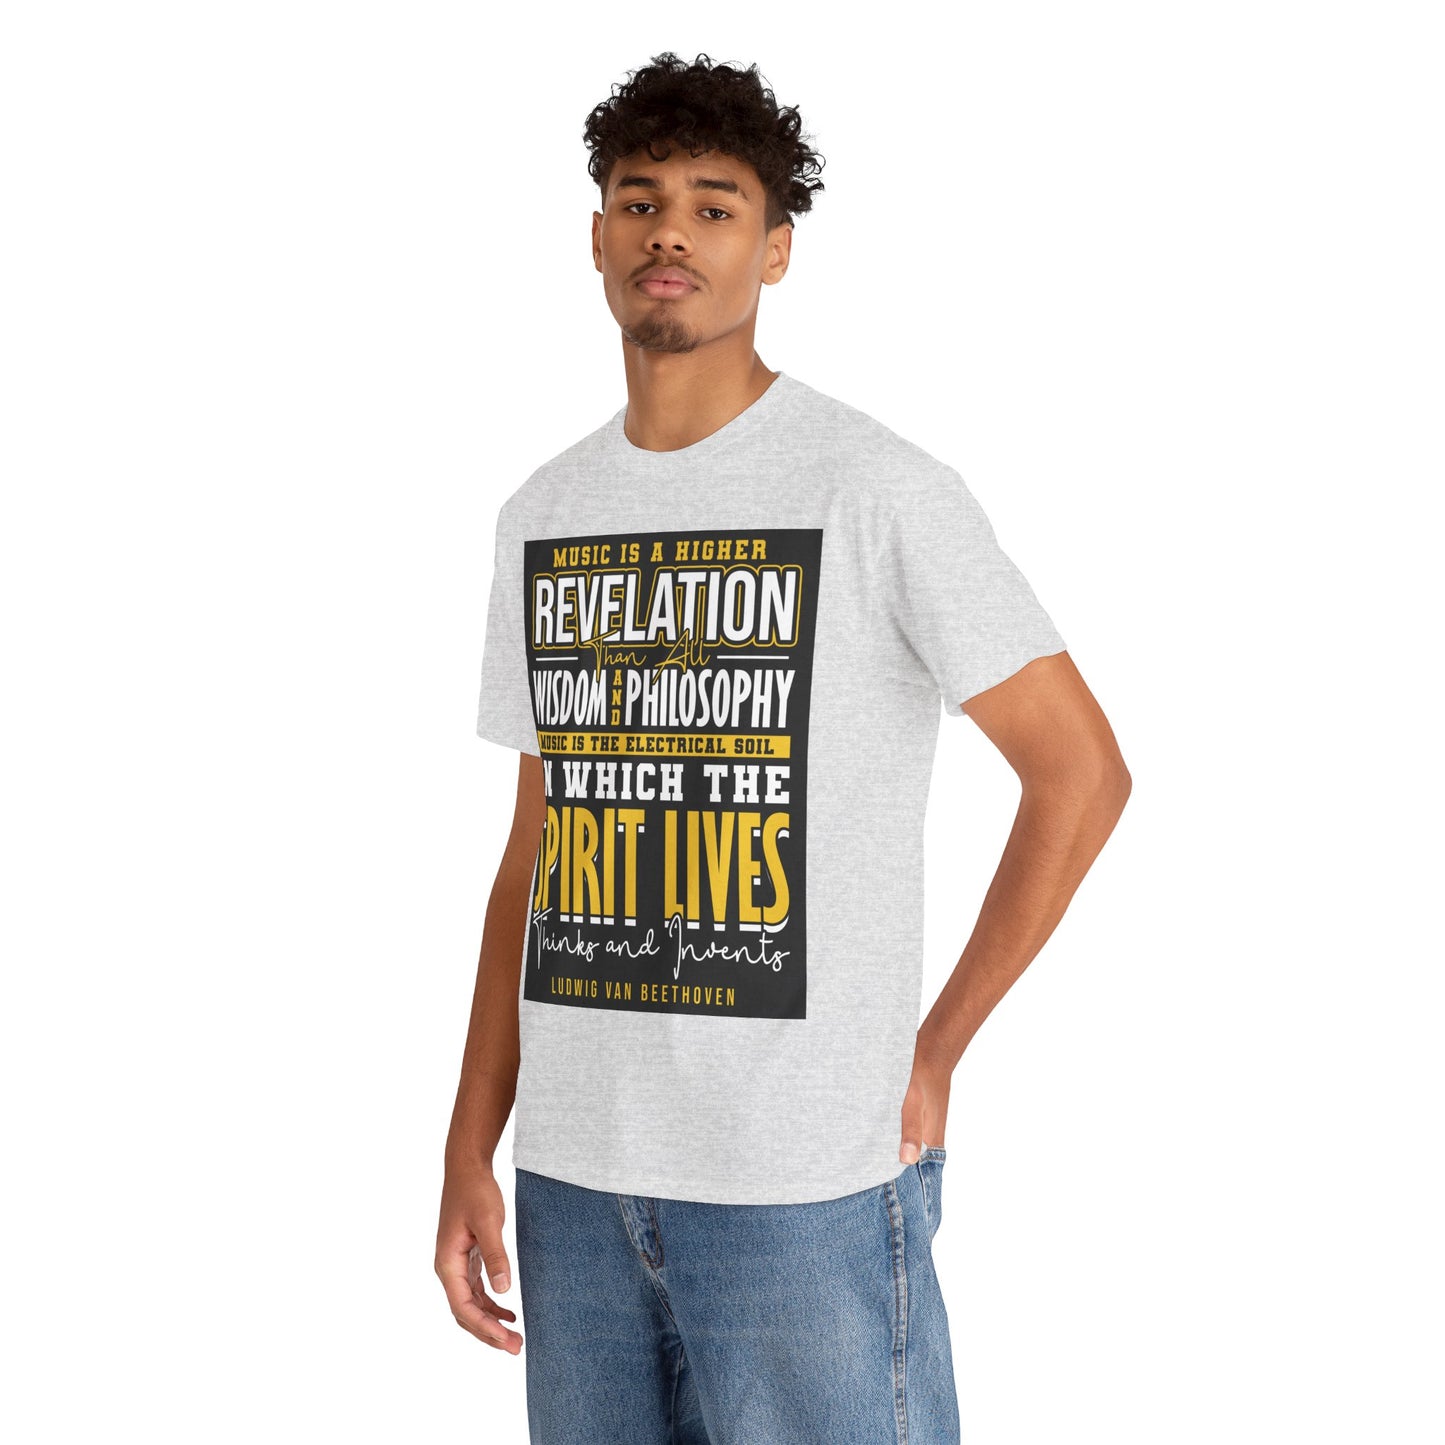 The Soul of Music T-Shirt: Music is a higher revelation than all wisdom and philosophy